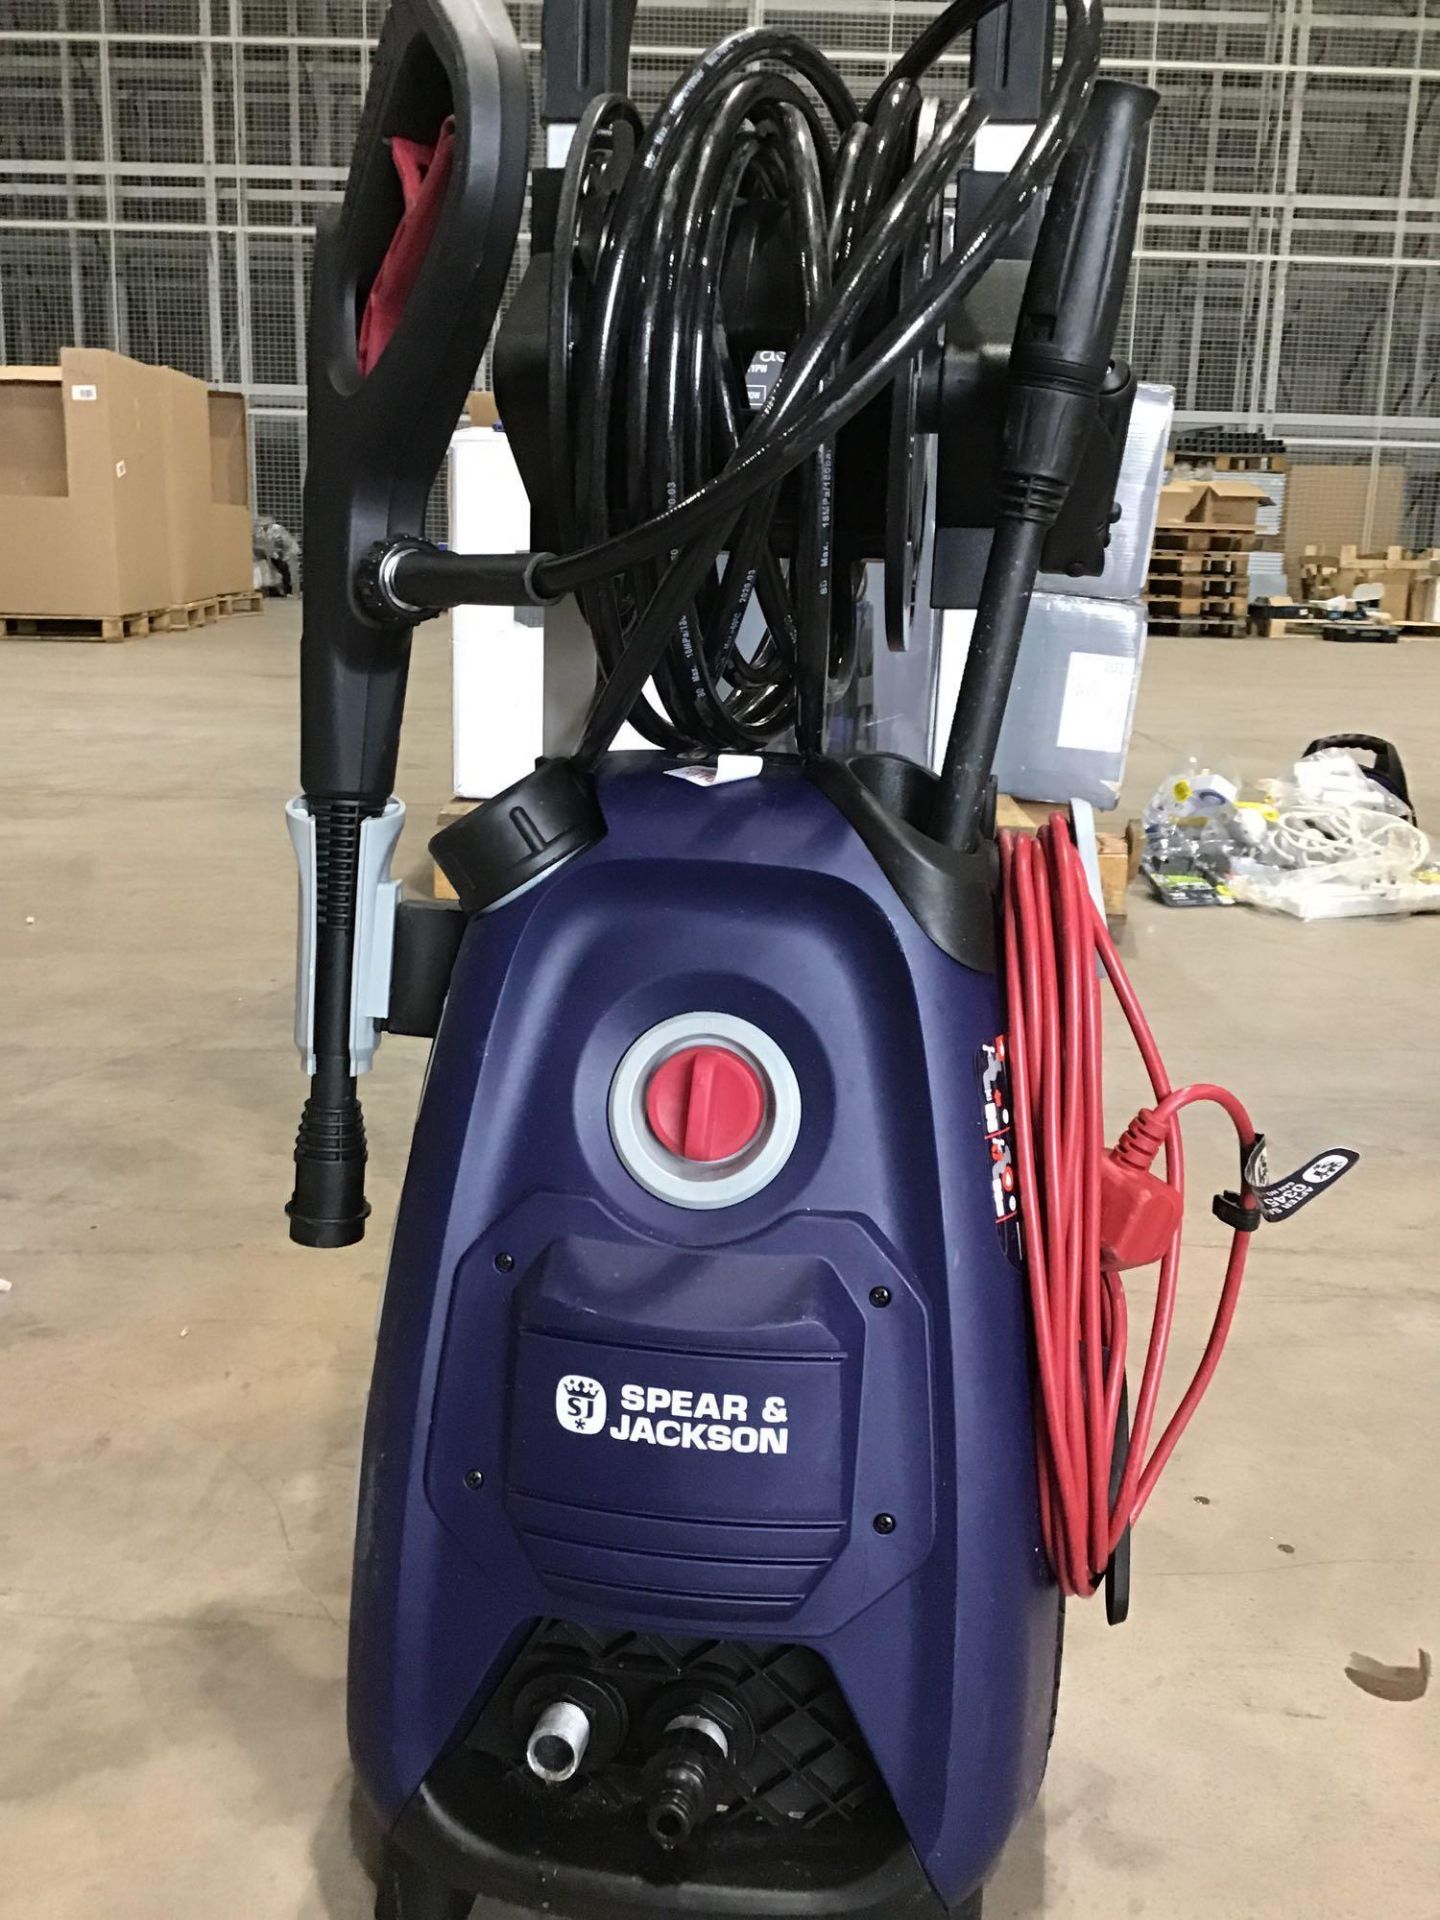 Spear & Jackson S2011PW Pressure Washer - 2000W, £150.00 RRP - Image 2 of 4